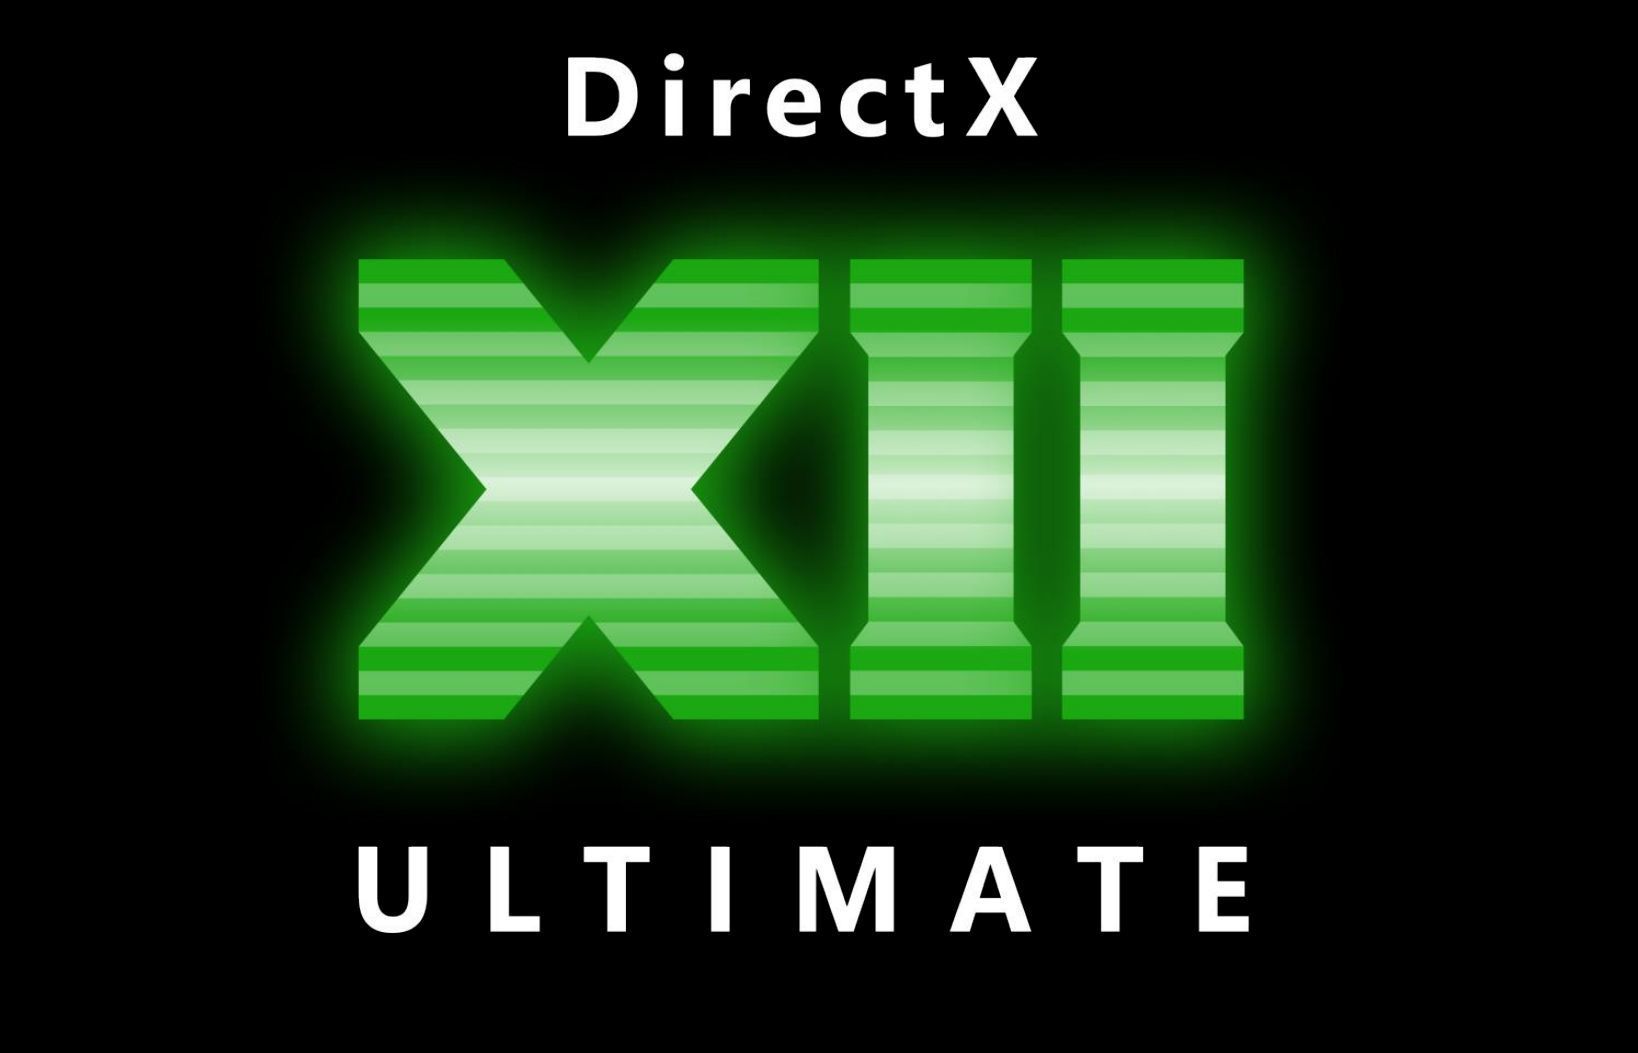 Nvidia Geforce Rtx Graphics Cards Are Now The First Directx 12